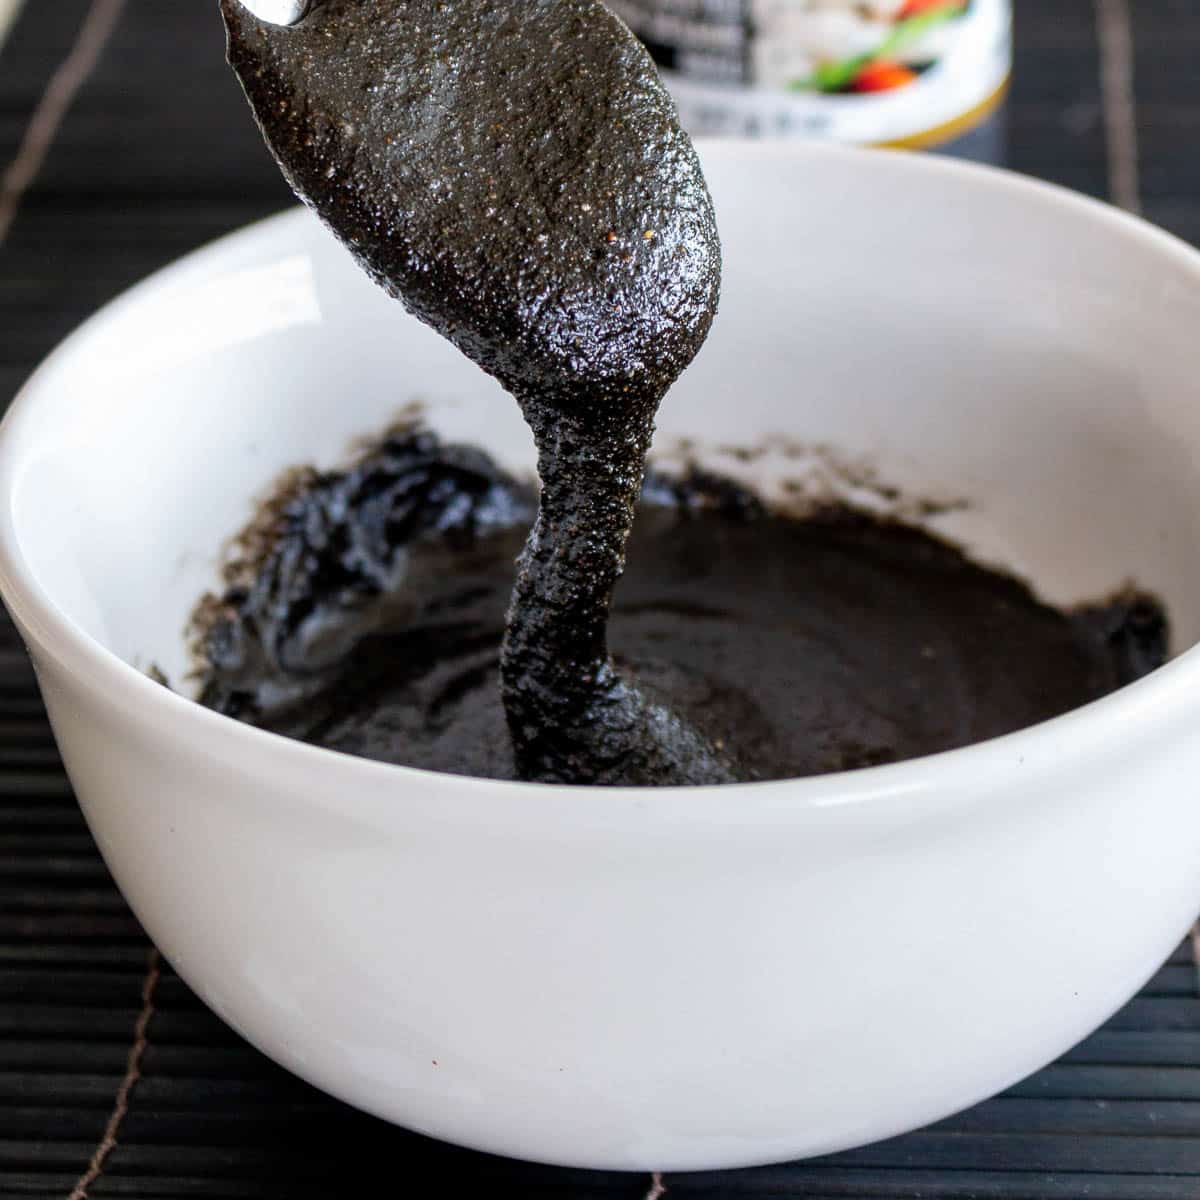 Homemade black sesame paste thick and slowly flowing from a spoon onto a white bowl.